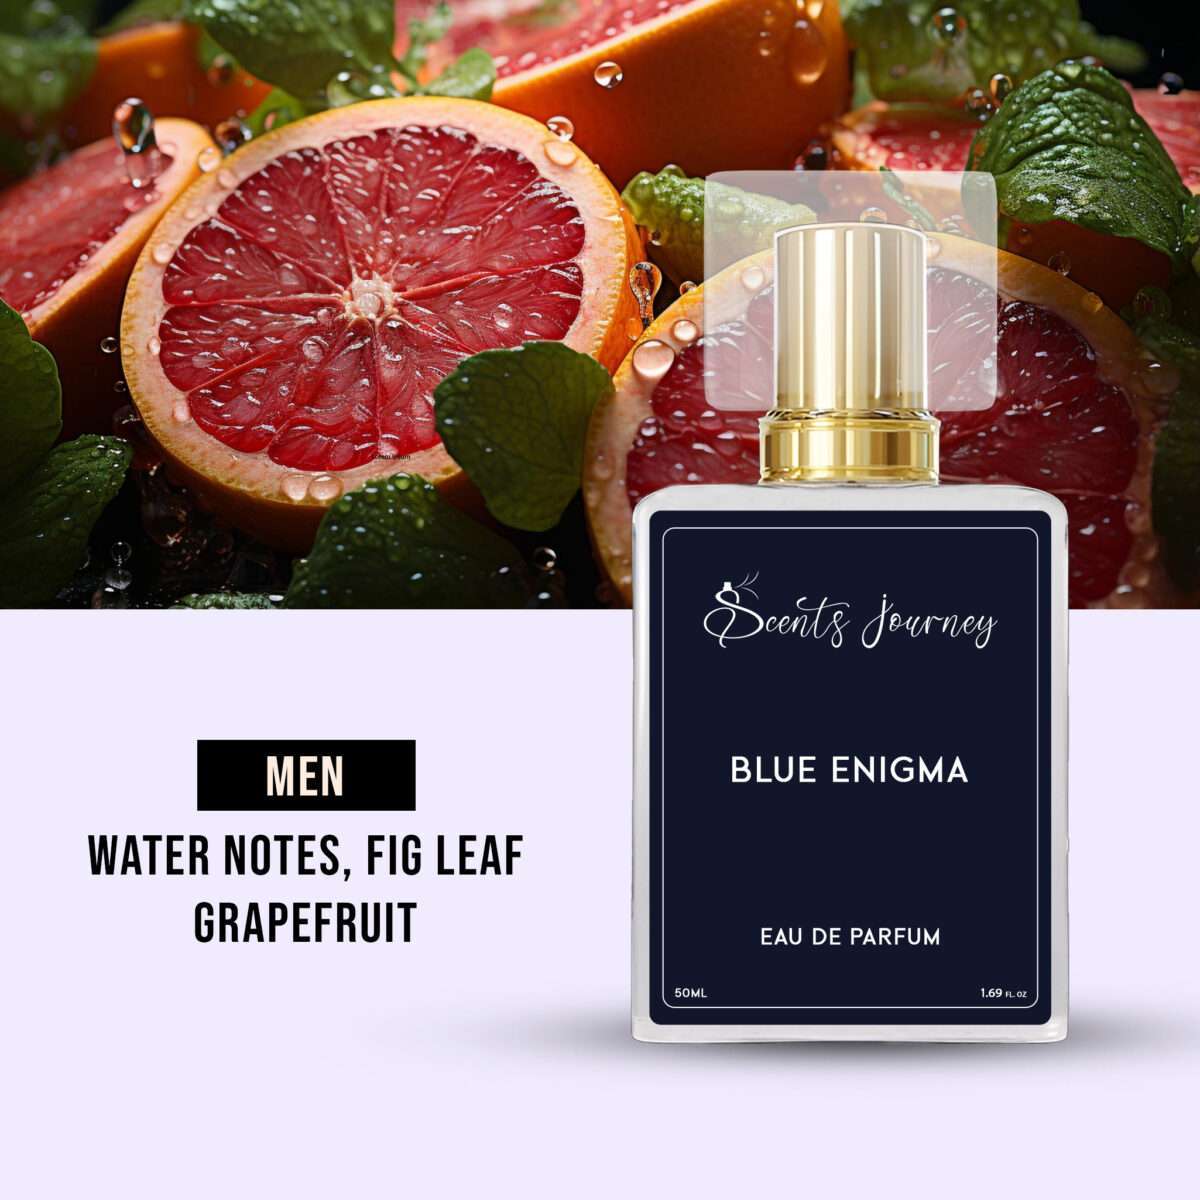 ENIGMA PERFUME INSPIRED BY VERSACE BLUE